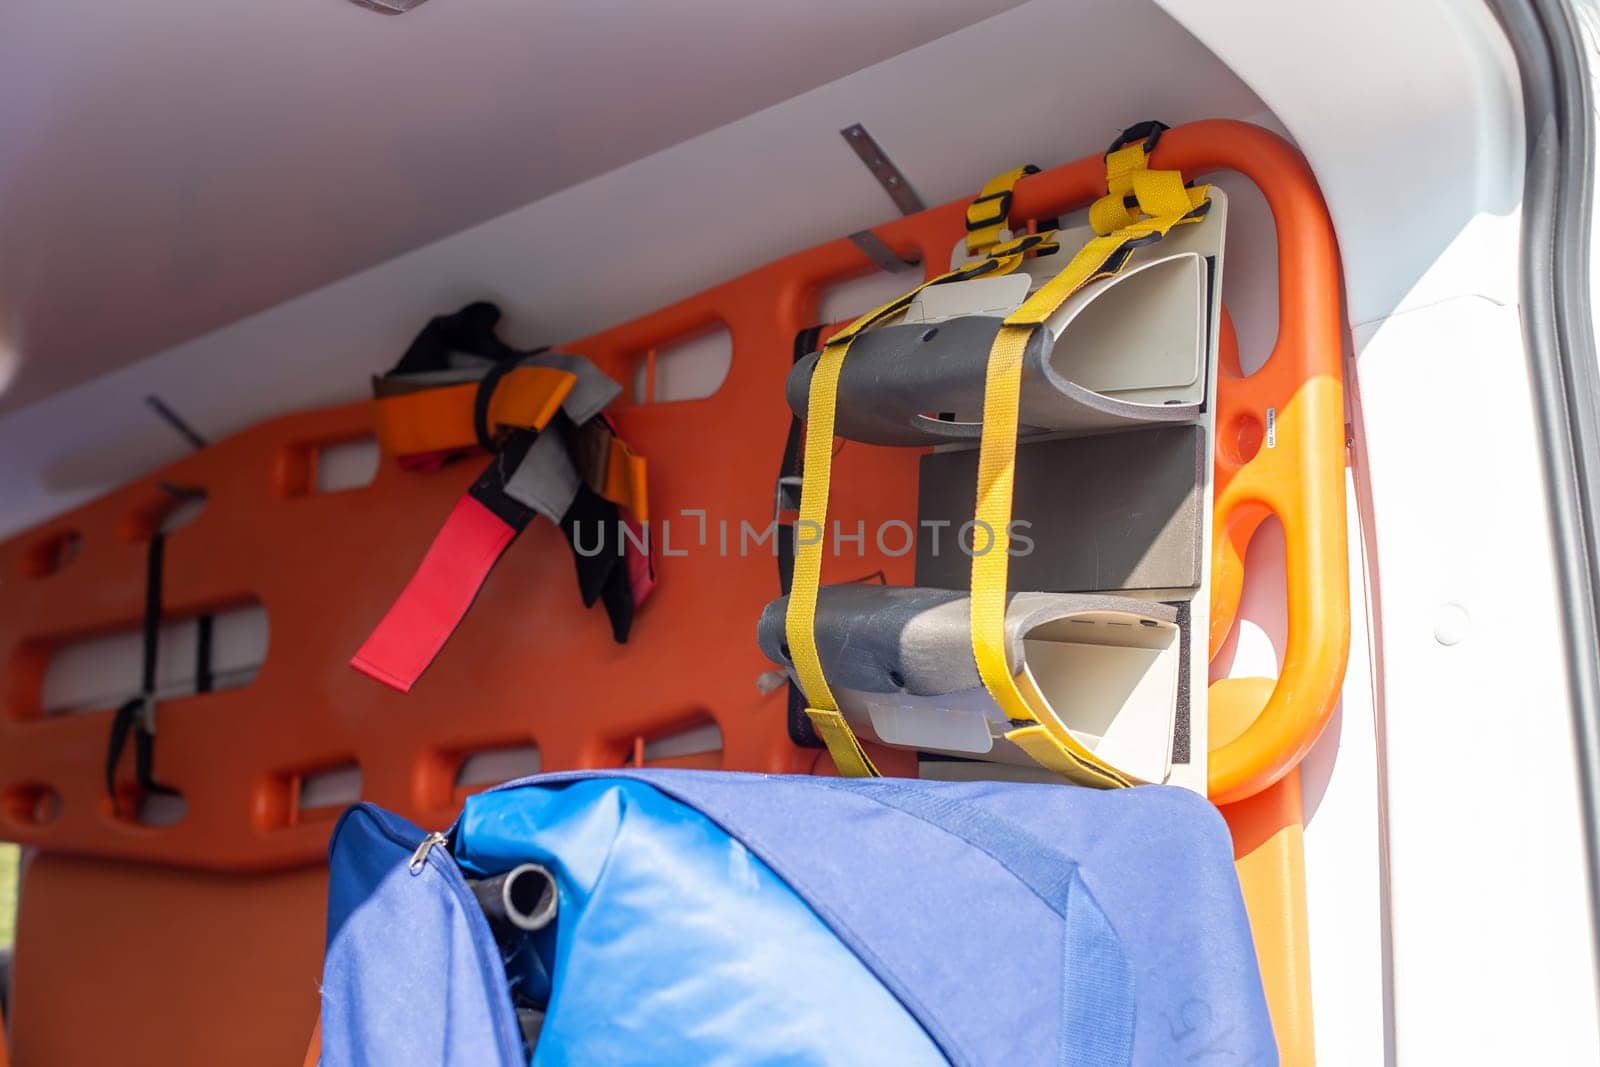 A close-up of an orange stretcher with a fixation hanging on the wall in the cabin of an ambulance.